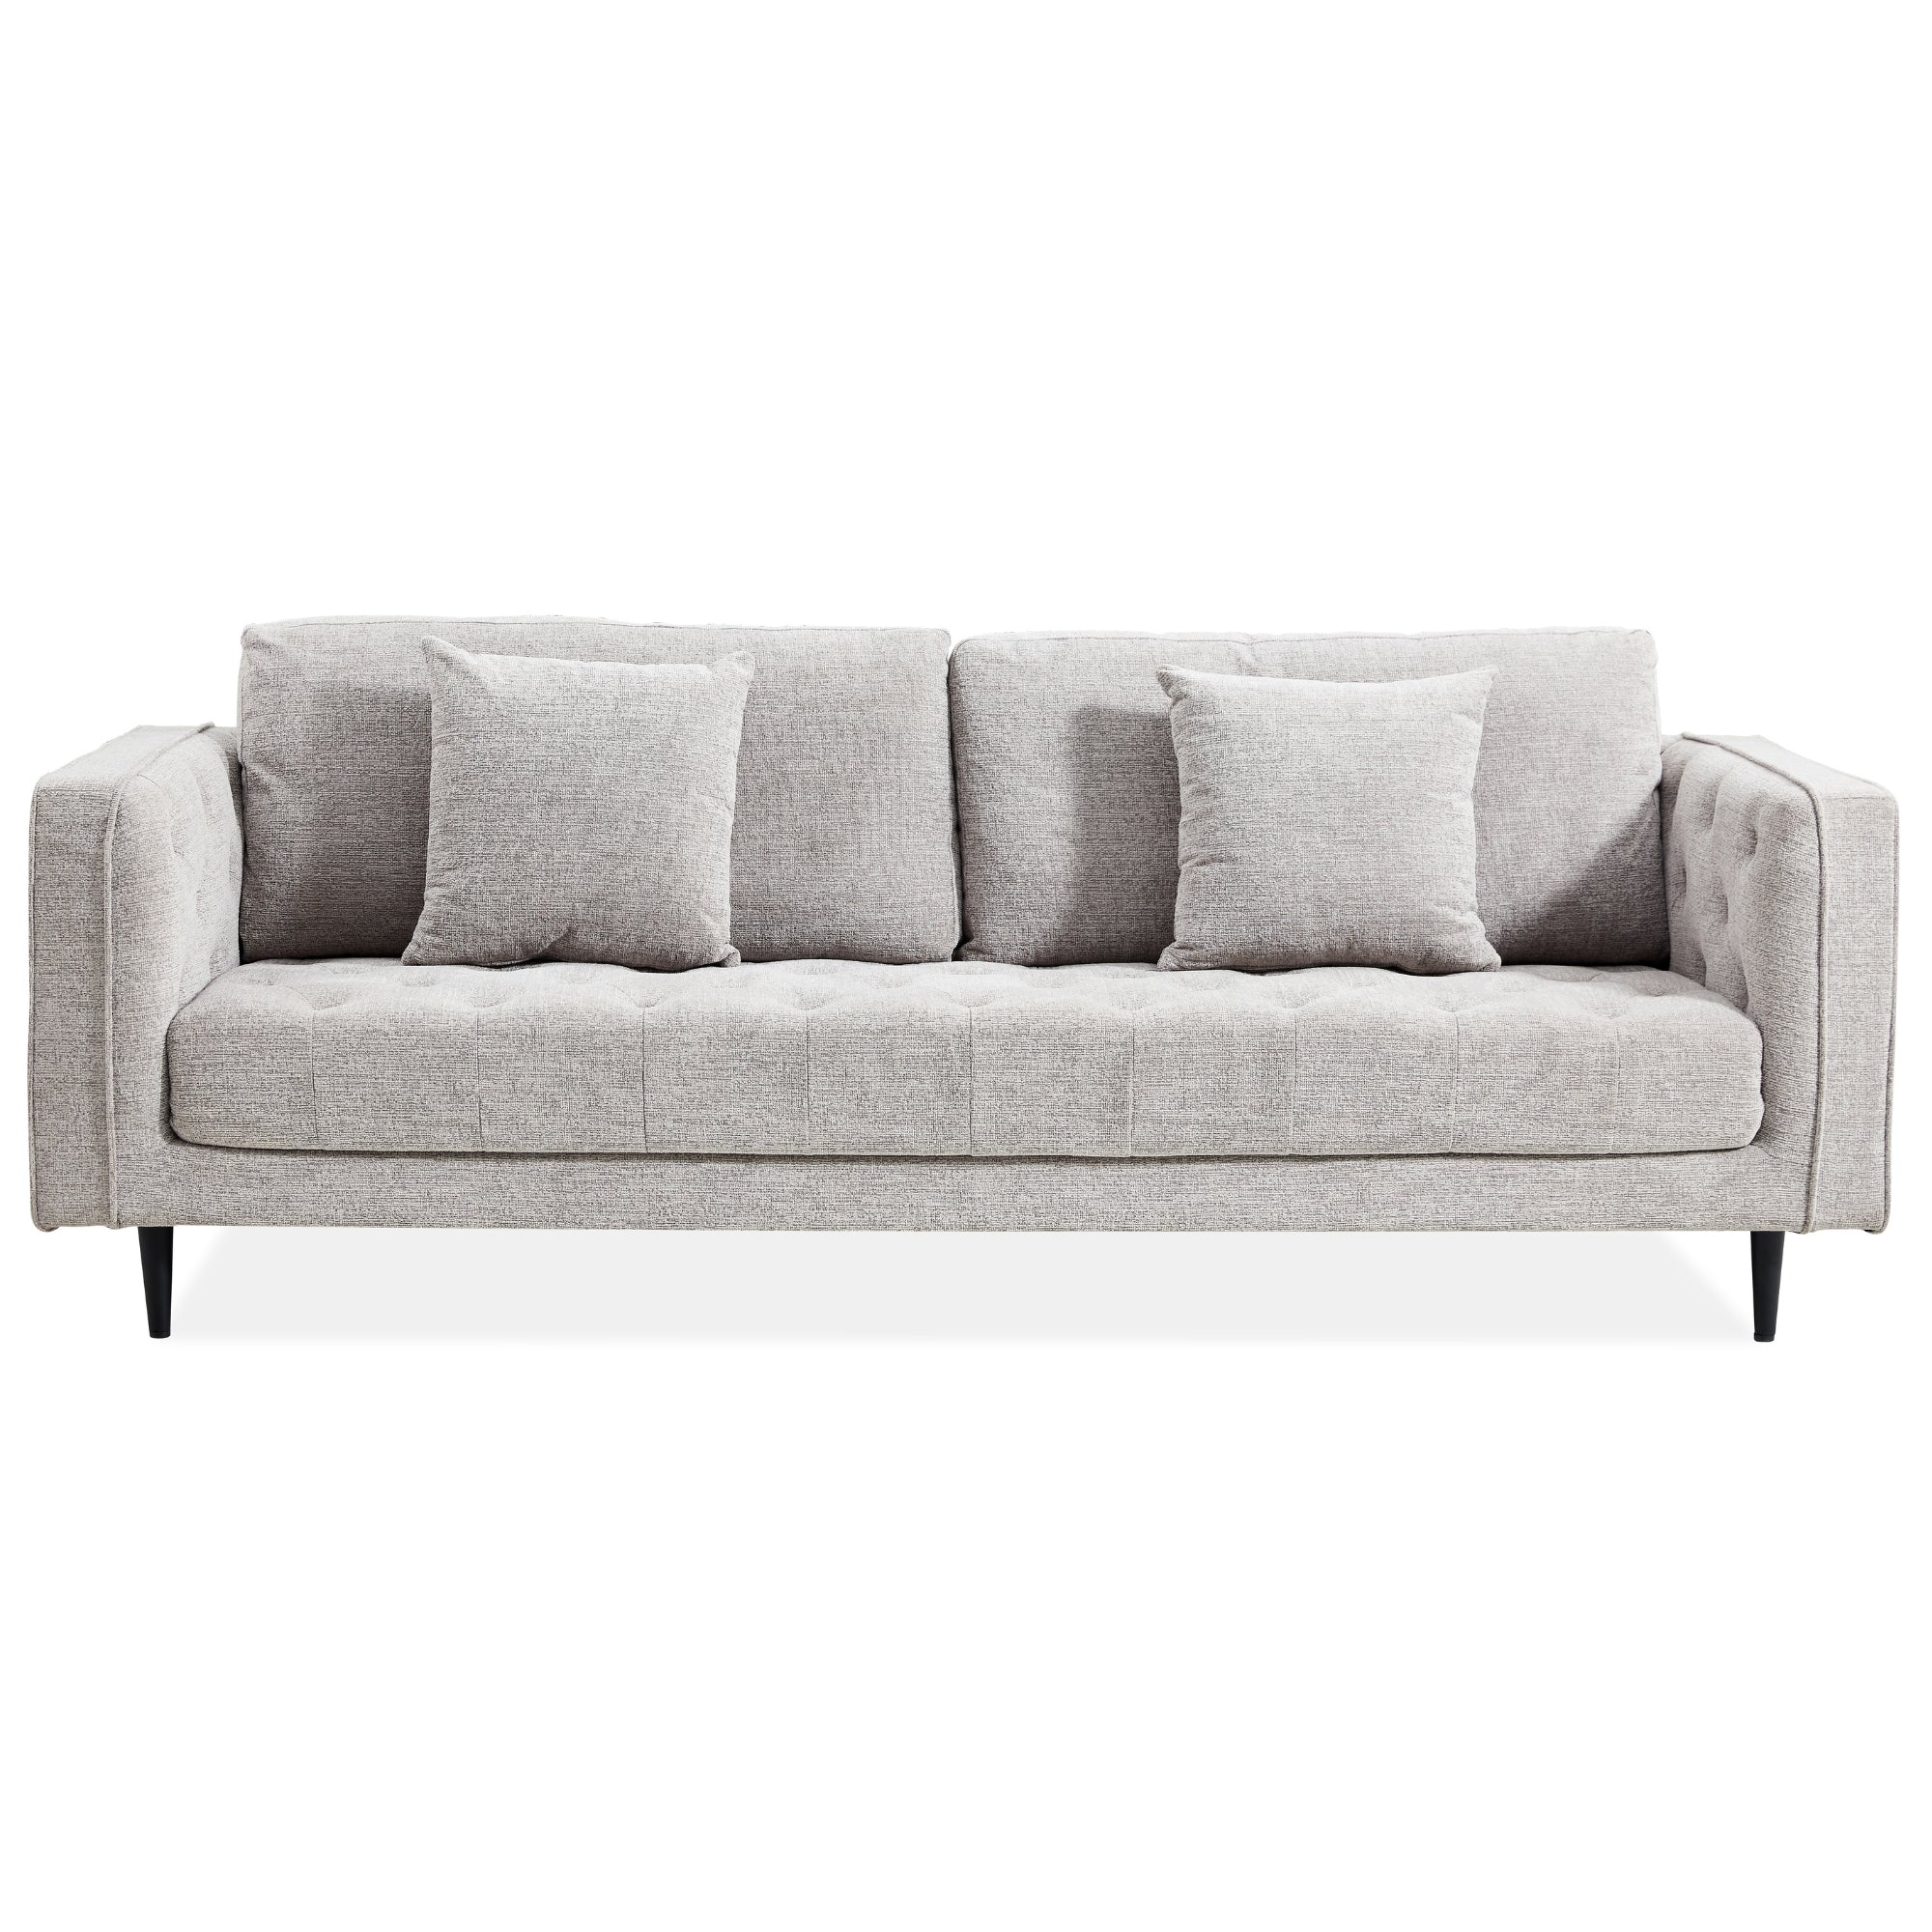 Extra-Large 3-Seater Sofa with Scatter Cushions, Hampton Fabric - Jolie